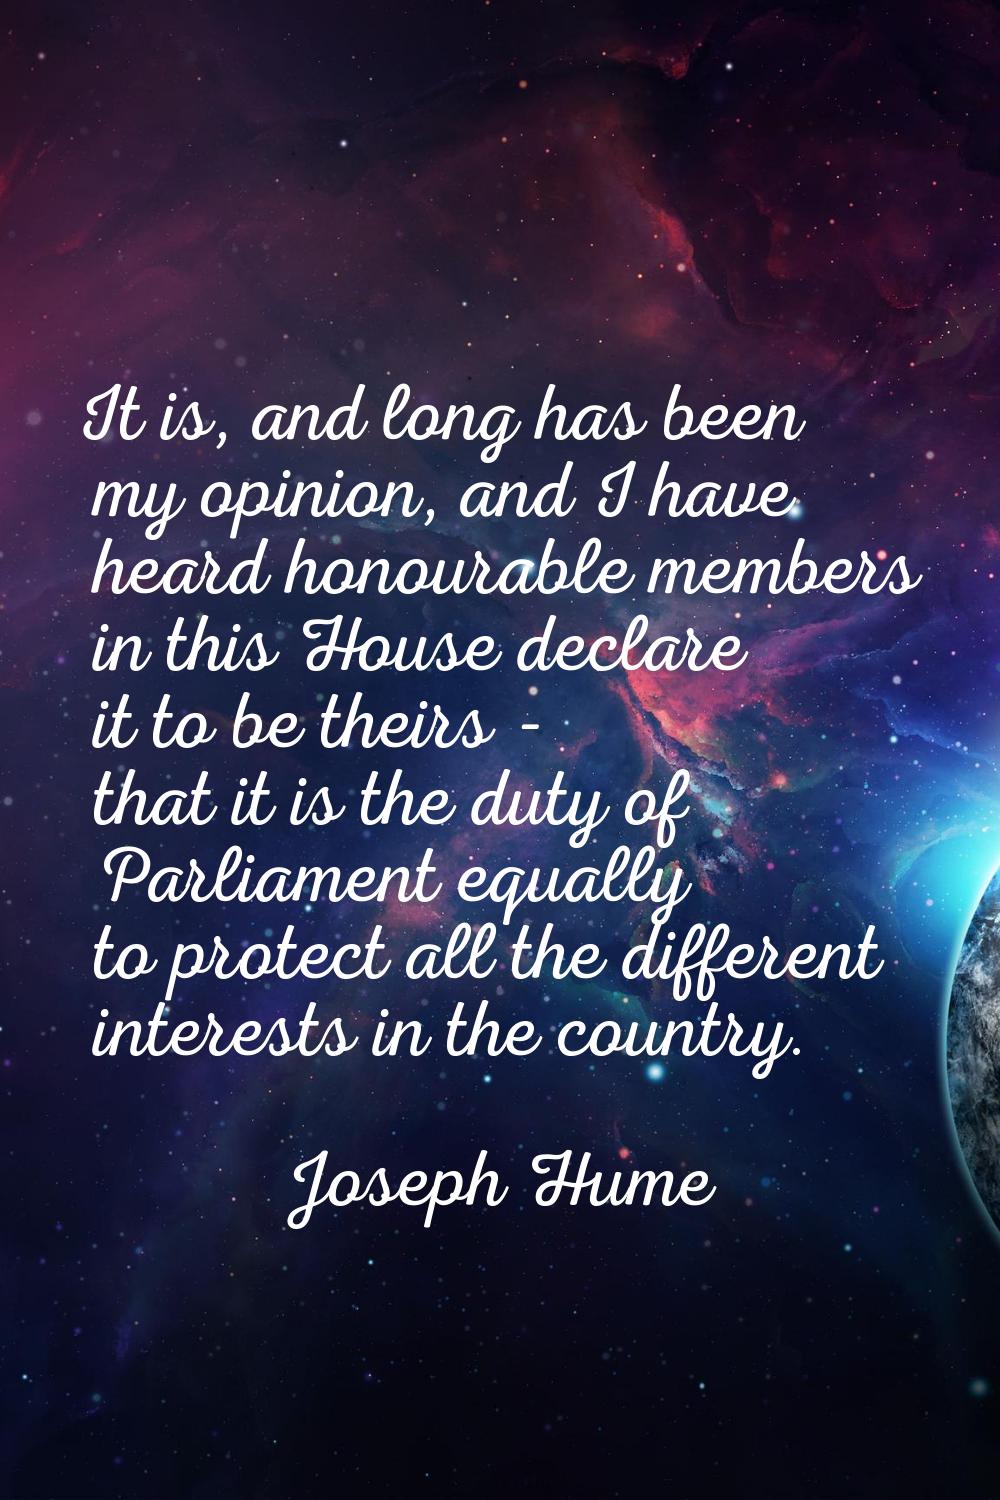 It is, and long has been my opinion, and I have heard honourable members in this House declare it t